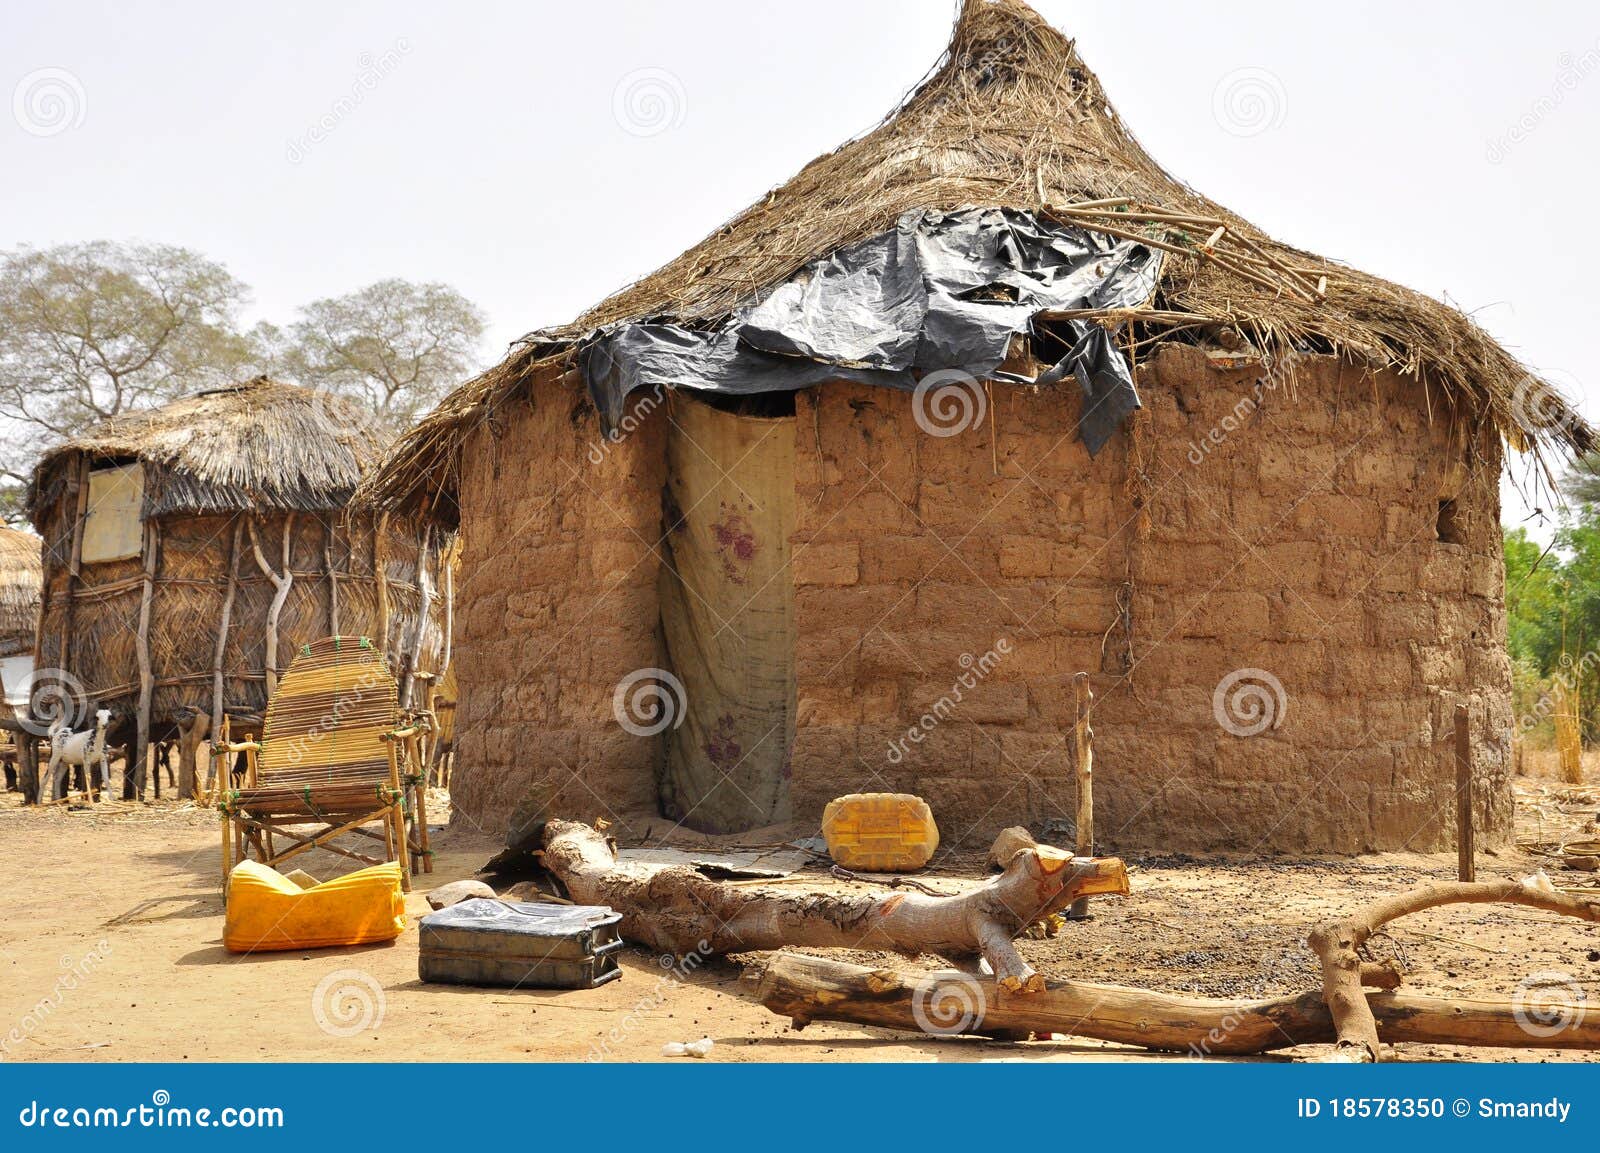 Traditional African Village Houses In Niger Stock Photo - Image: 18578350